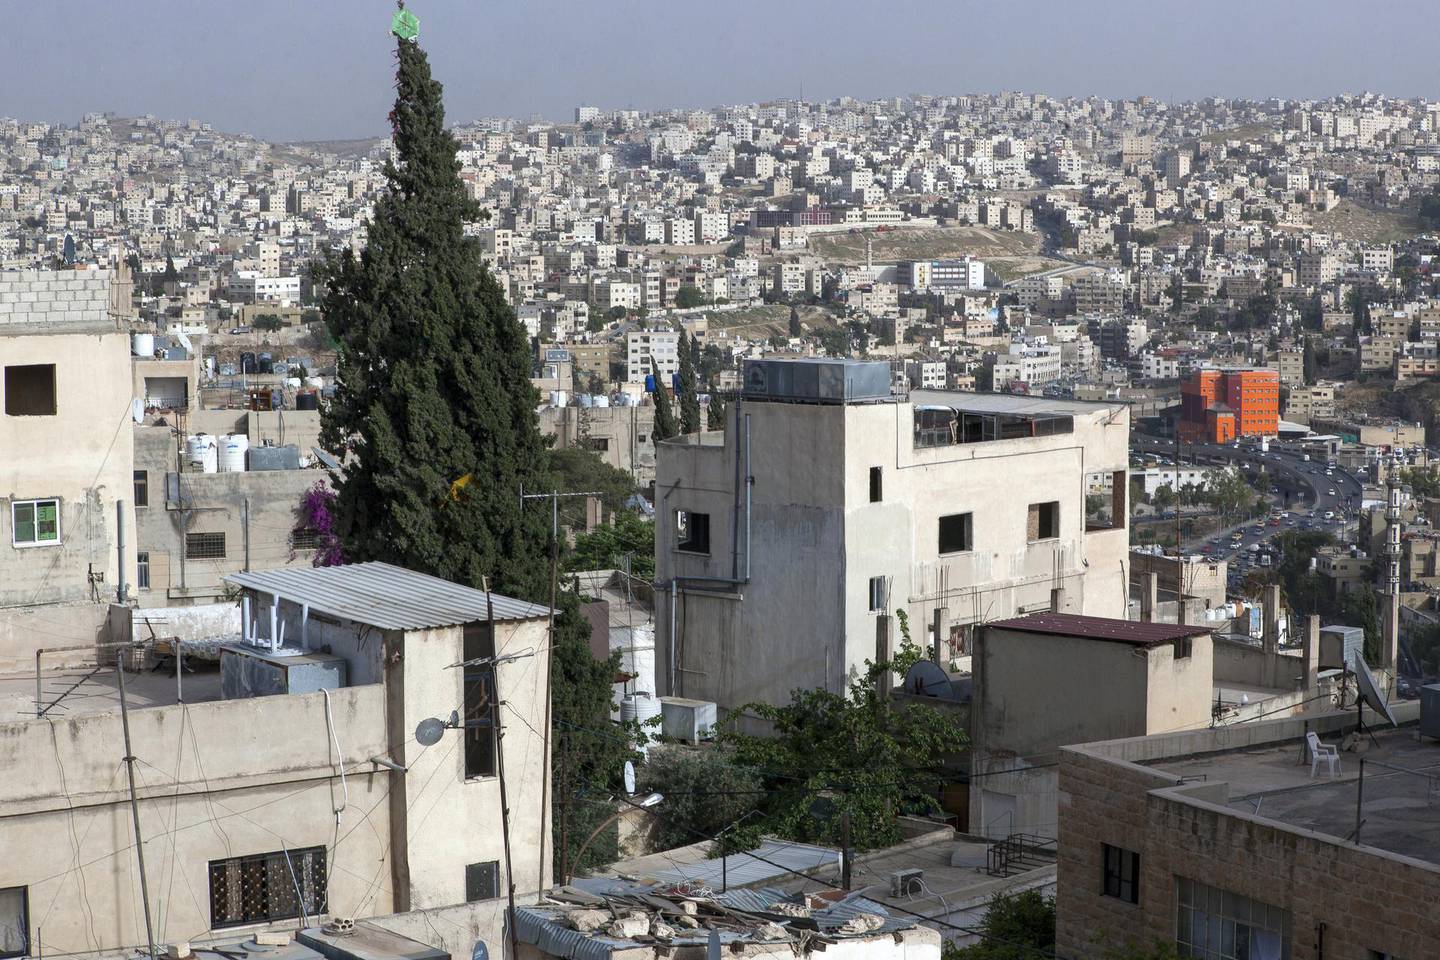 Overview of Al Hashmi Al Shamali, a district of North East Amman, where majority of the 1,400 Iraqi Mandaean exiled in Jordan live. Sebastian Castelier for The National